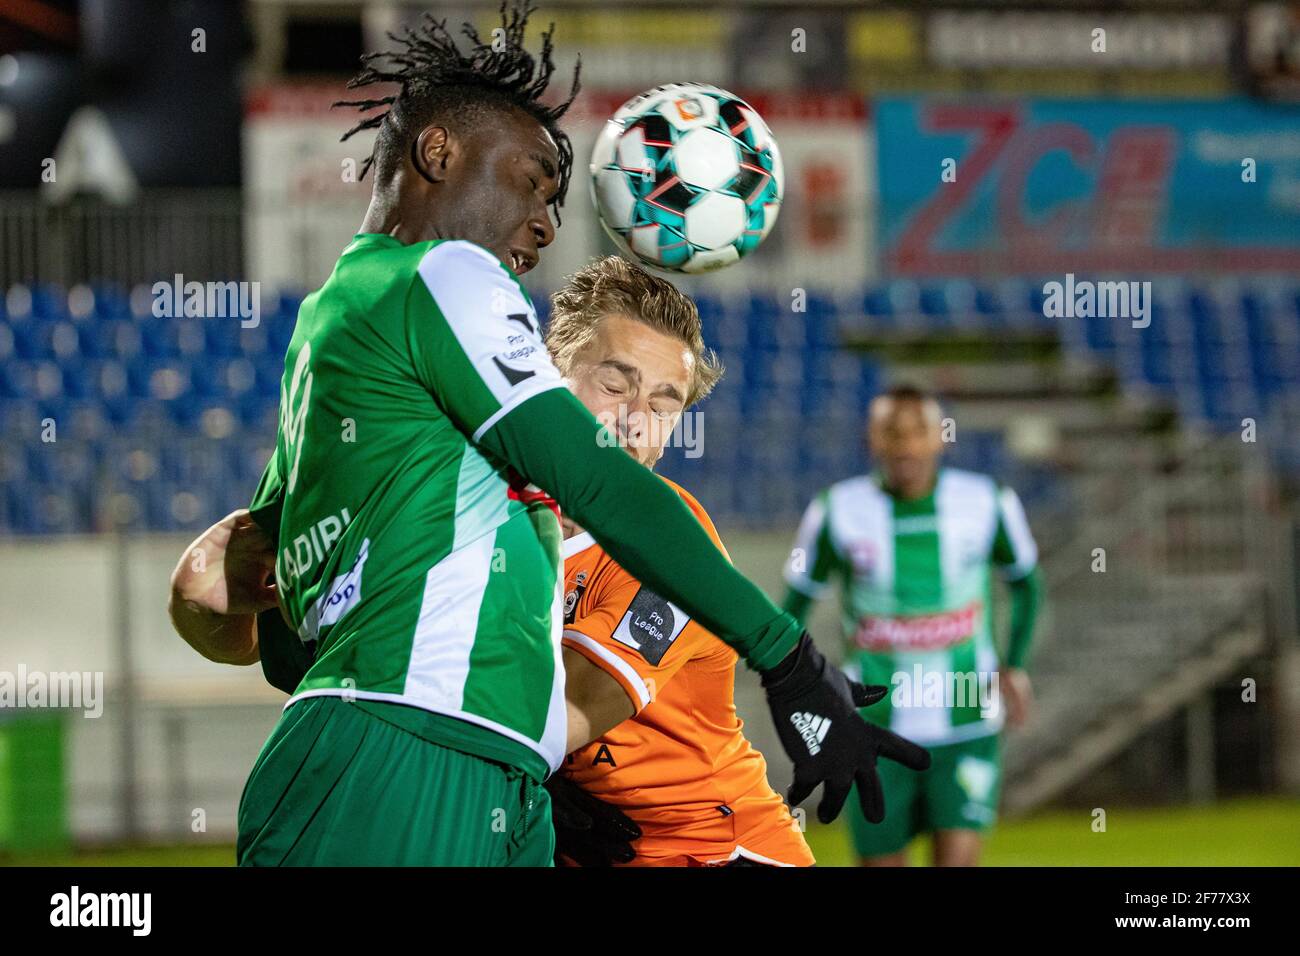 Lommel's Jordan Attah Kadiri and Deinze's Alessio Staelens fight for the ball during a soccer match between KMSK Deinze and Lommel SK, Monday 05 April Stock Photo